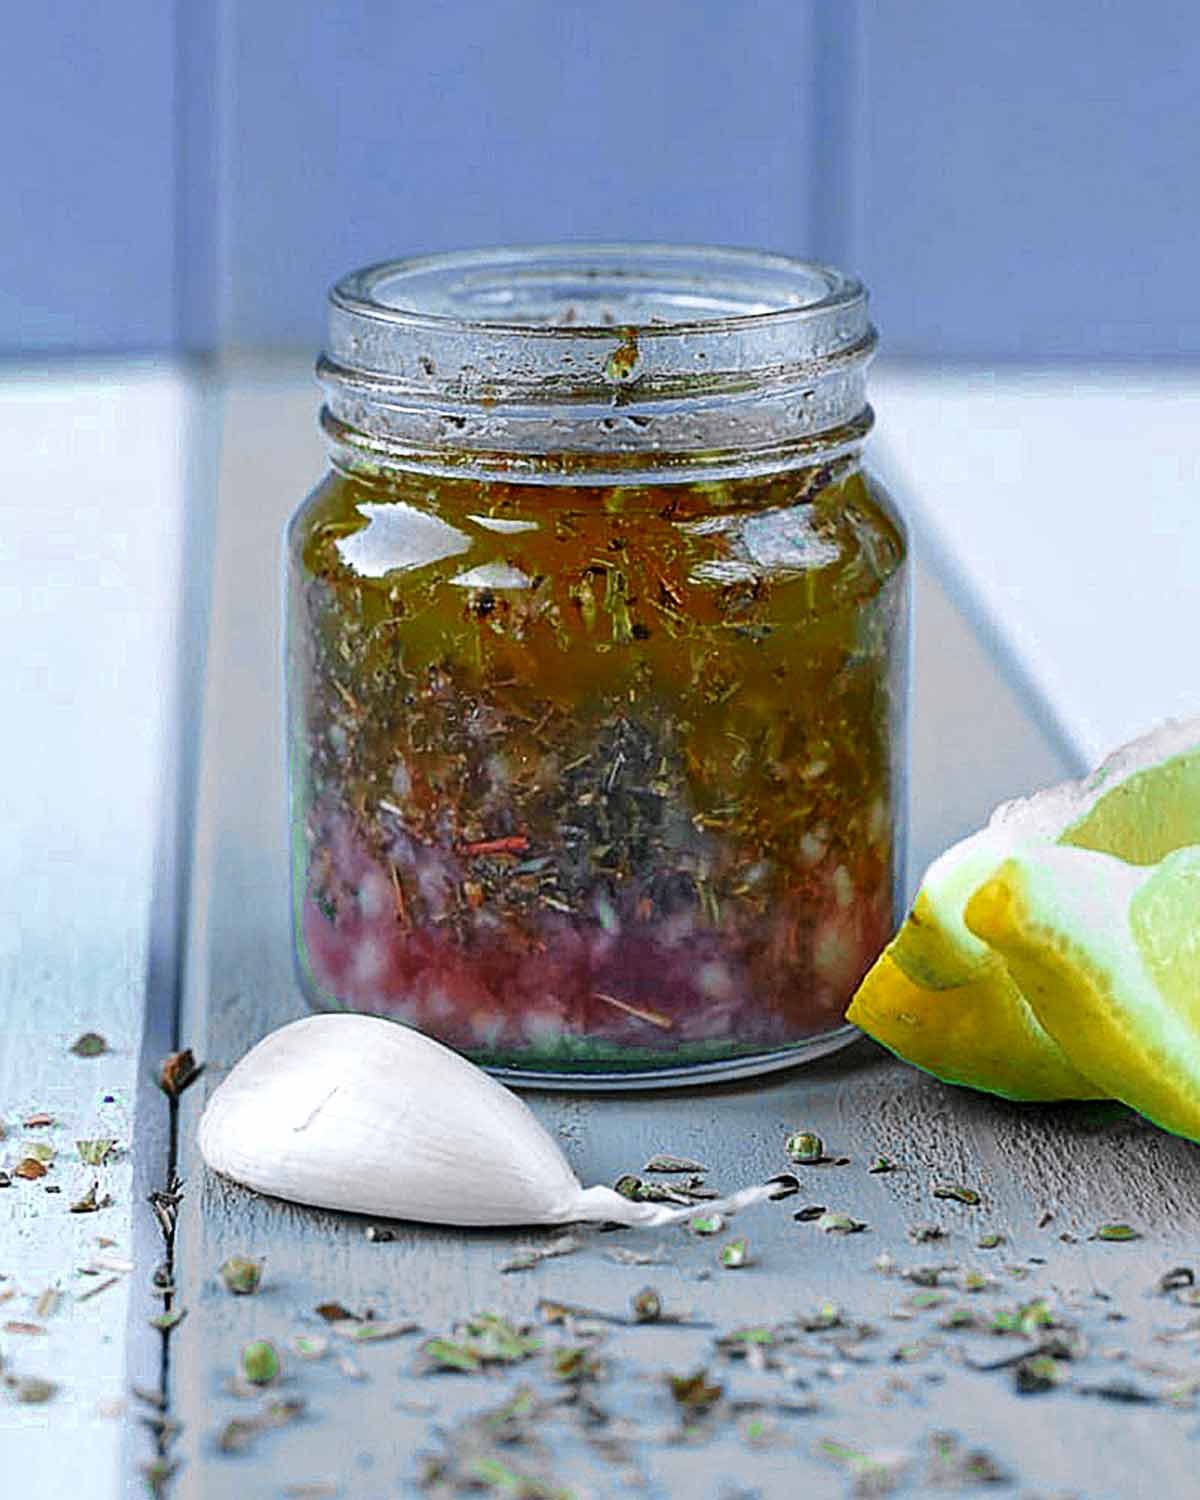 A small jar full of oil mixed with chopped herbs.